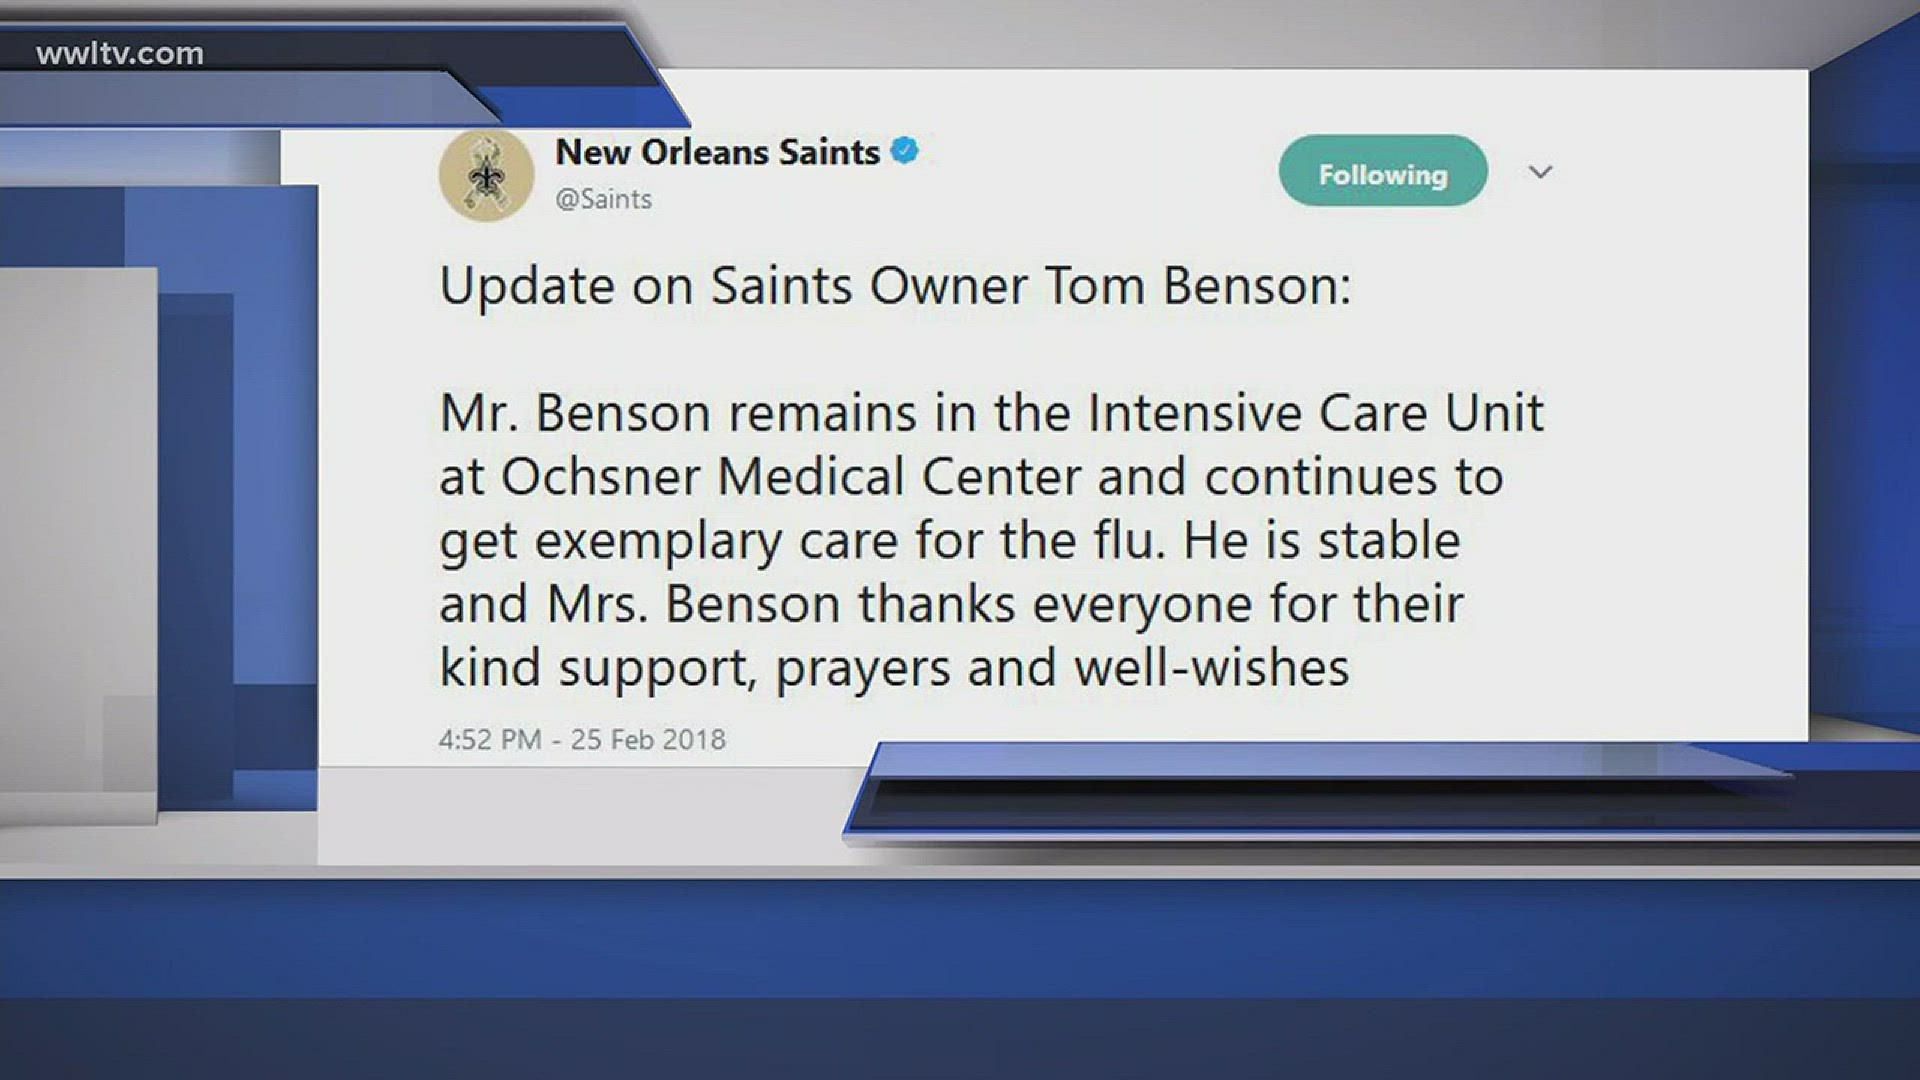 Benson, who turned 90 in July, was admitted in the ICU with flu-like symptoms on Wednesday.